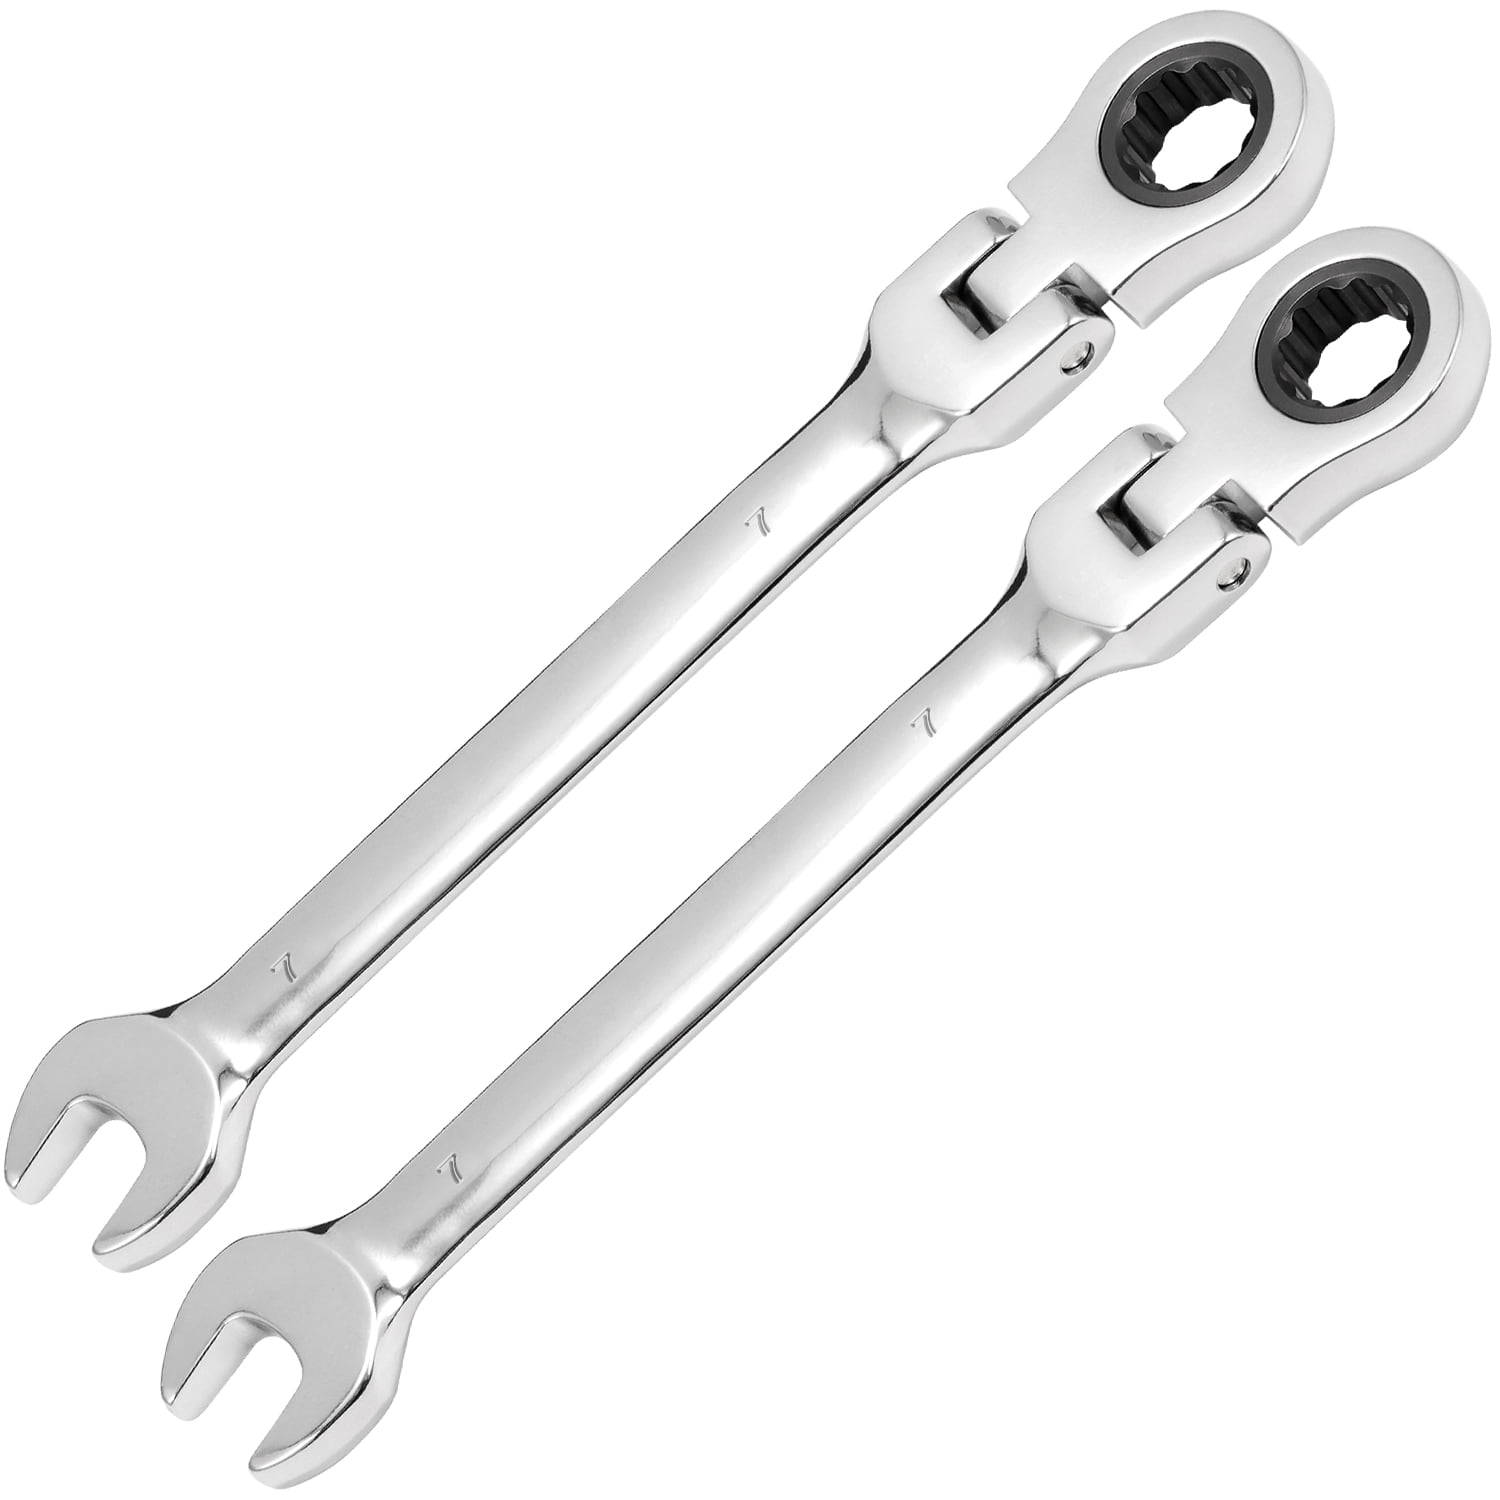 13mm Flexi Ratchet Combination Spanner Metric Wrench 72 Teeth Ring Open End 